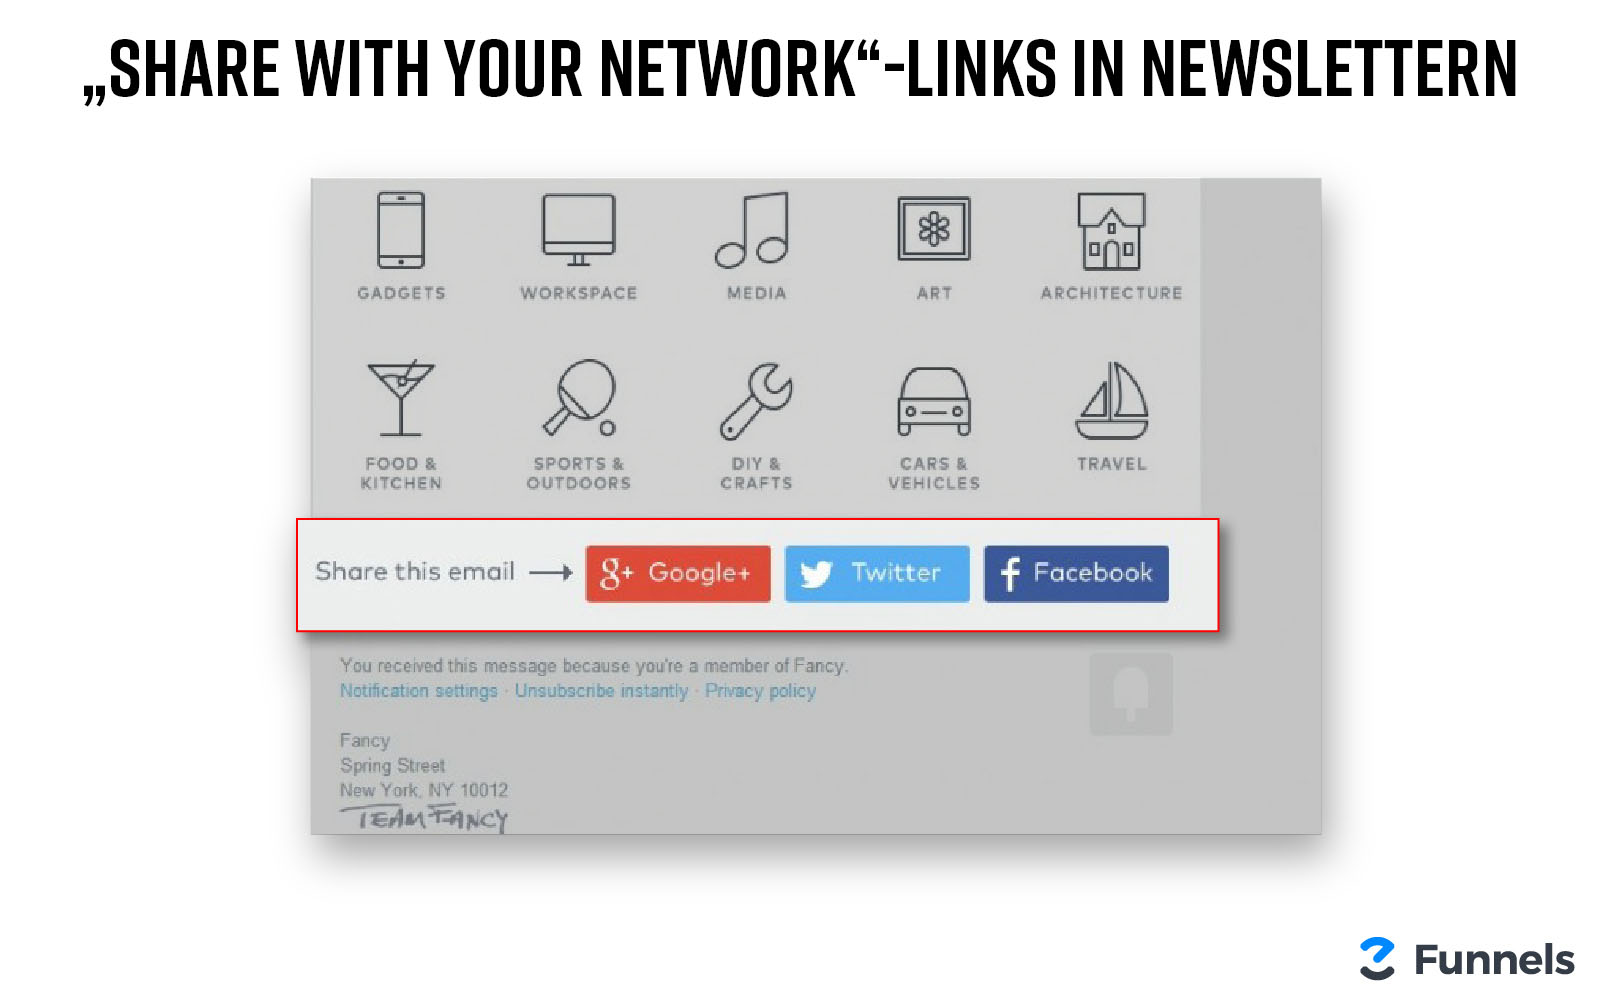 Share links with your network in Newslettern